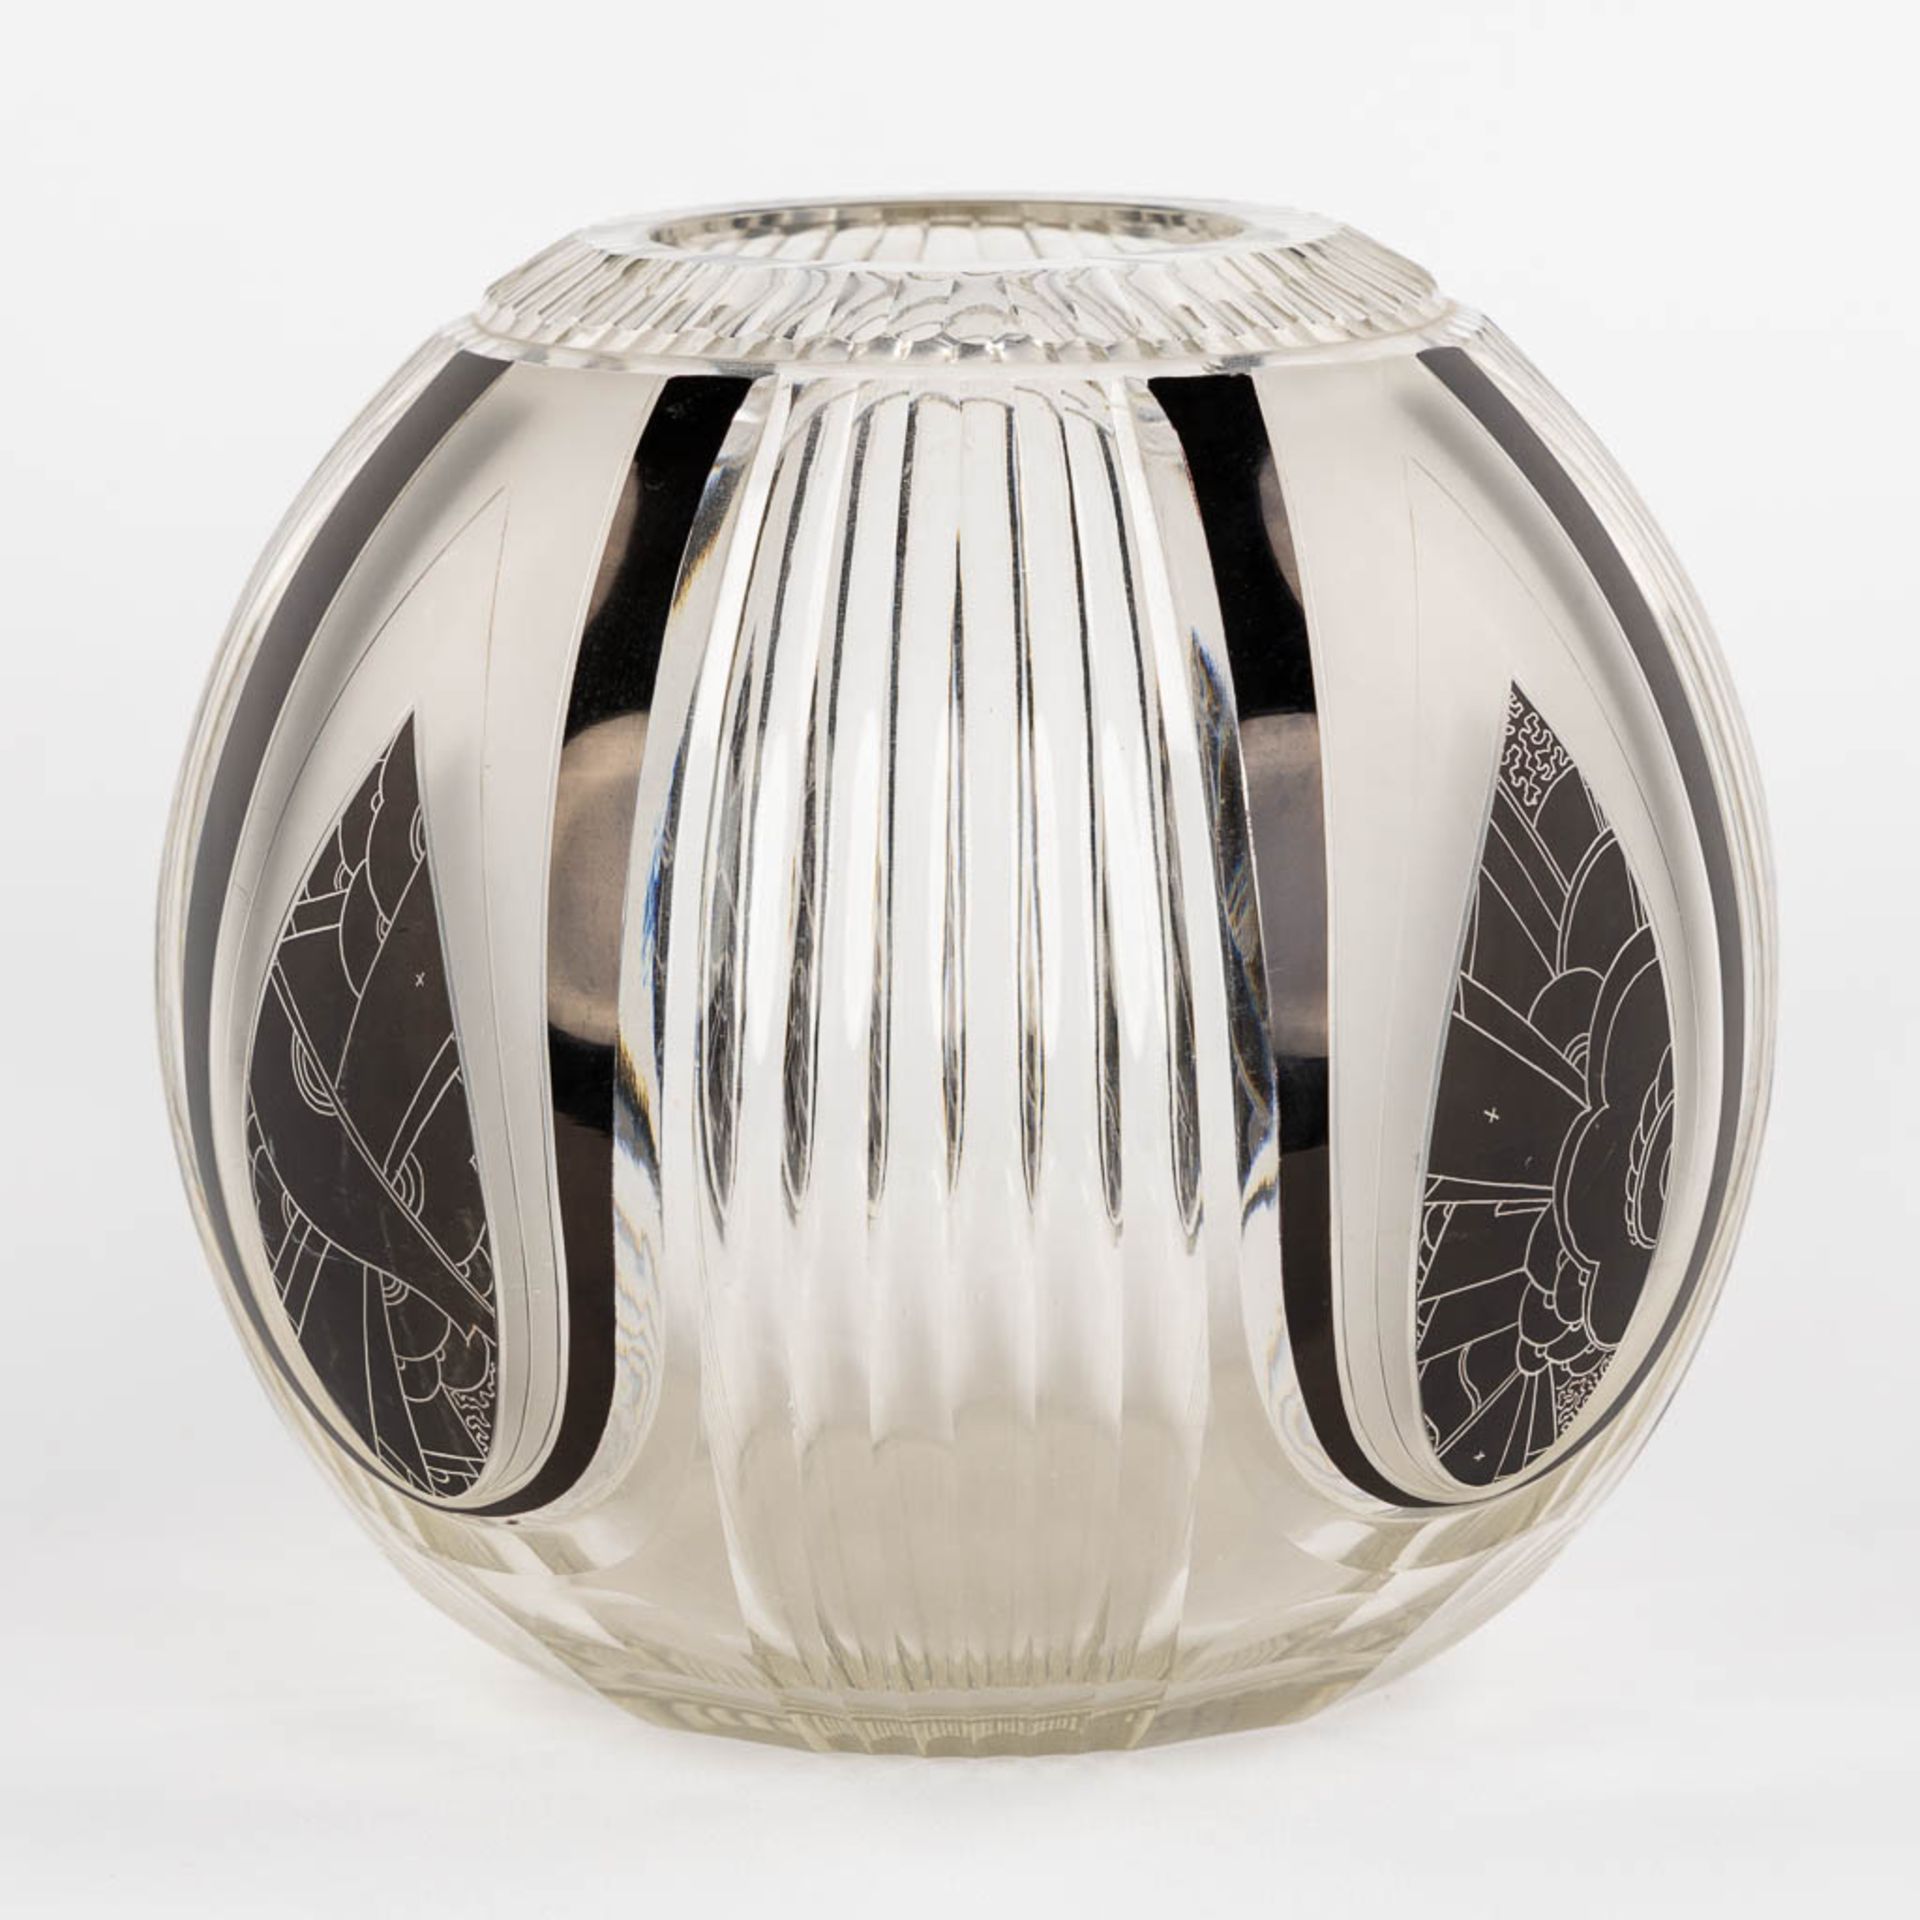 A round vase, glass in art deco style. (H:18 x D:18 cm) - Image 3 of 10